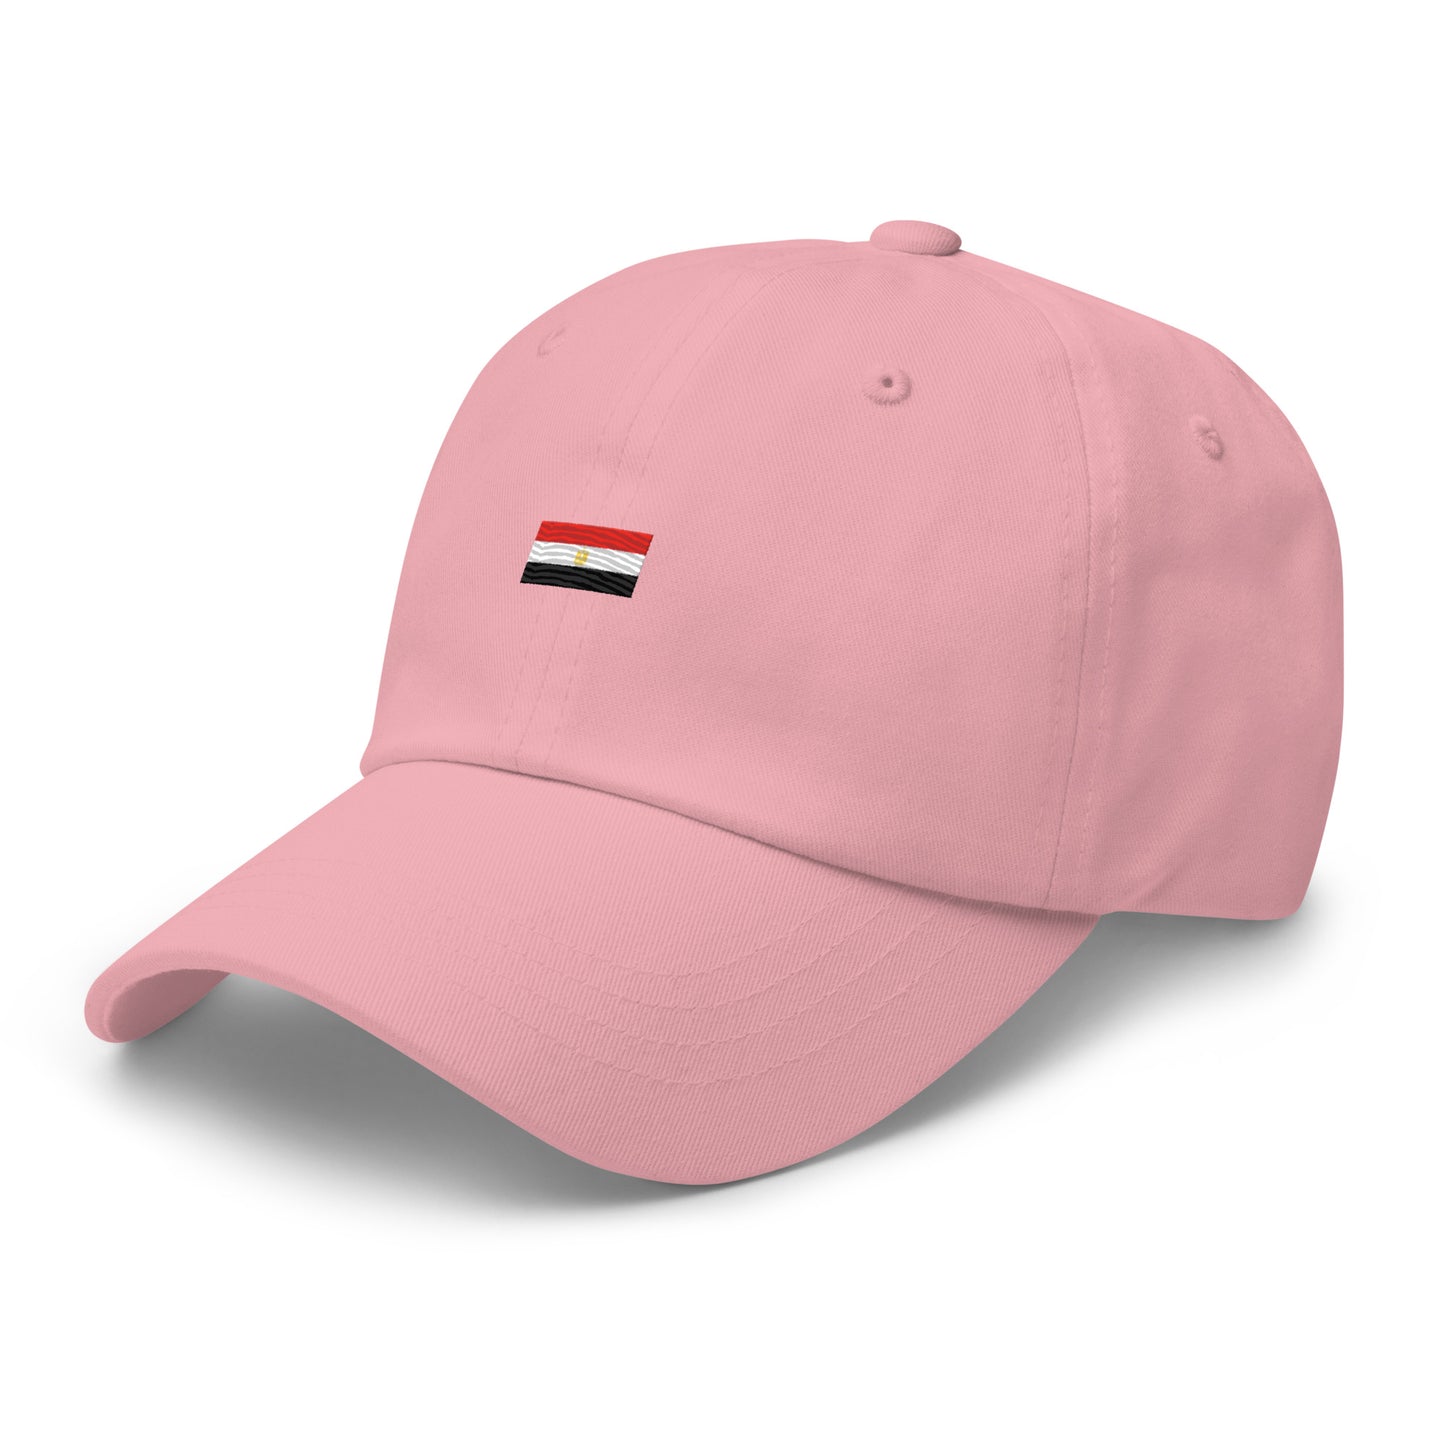 cap-from-the-front-with-egyptian-flag